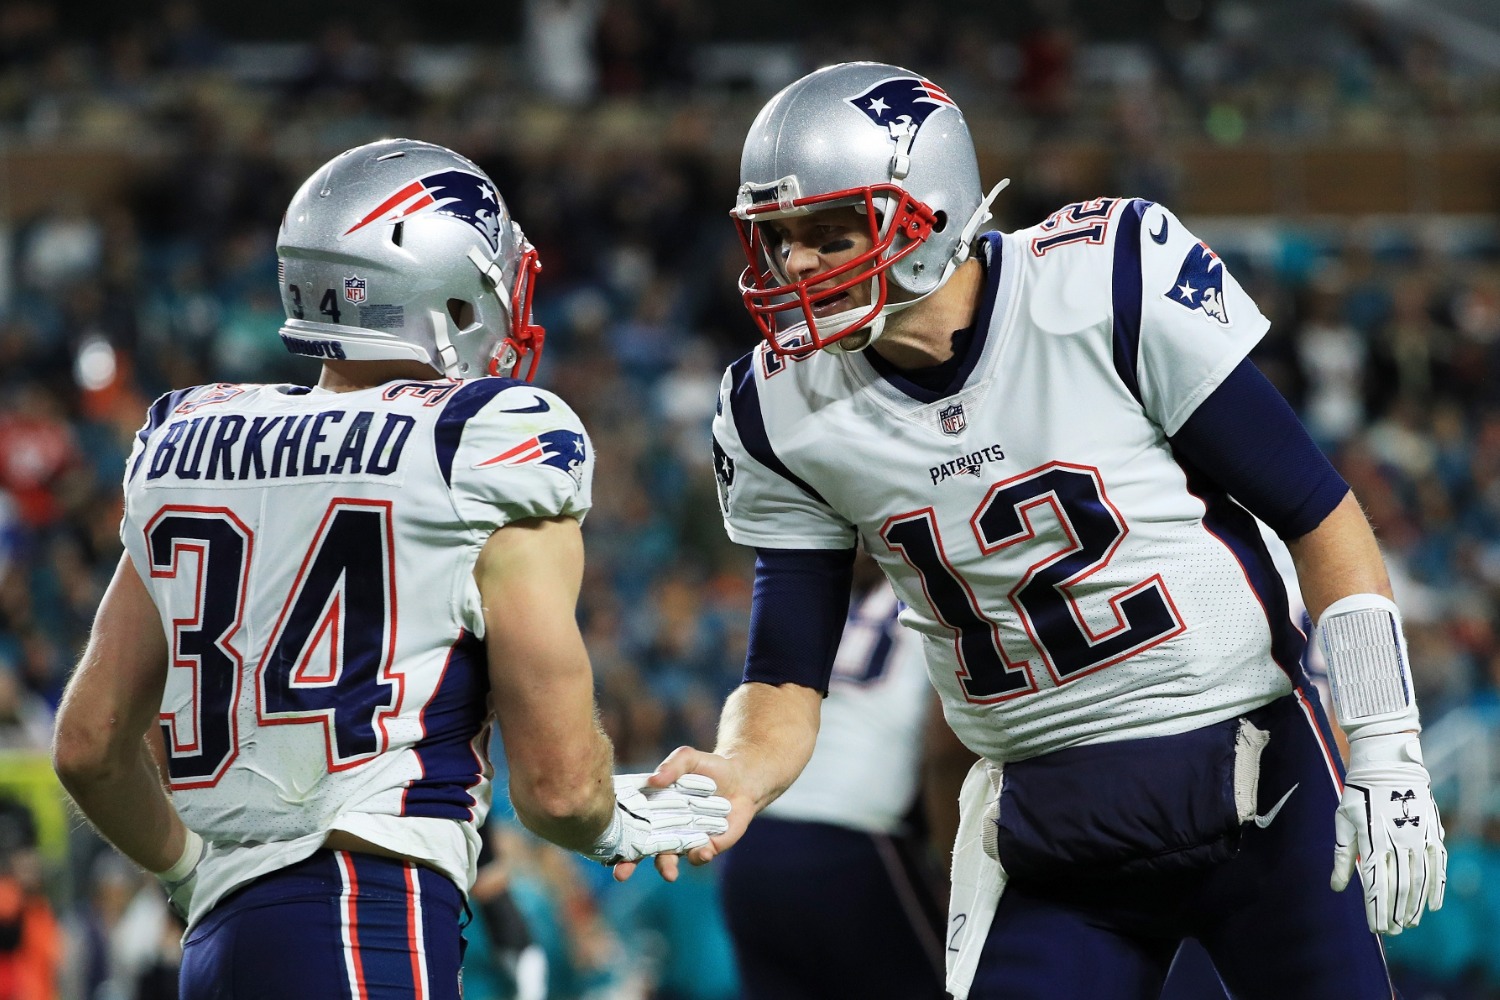 Tom Brady's career nearly came to an end because of Rex Burkhead, but that didn't stop Brady from leading the Patriots to a Super Bowl berth.